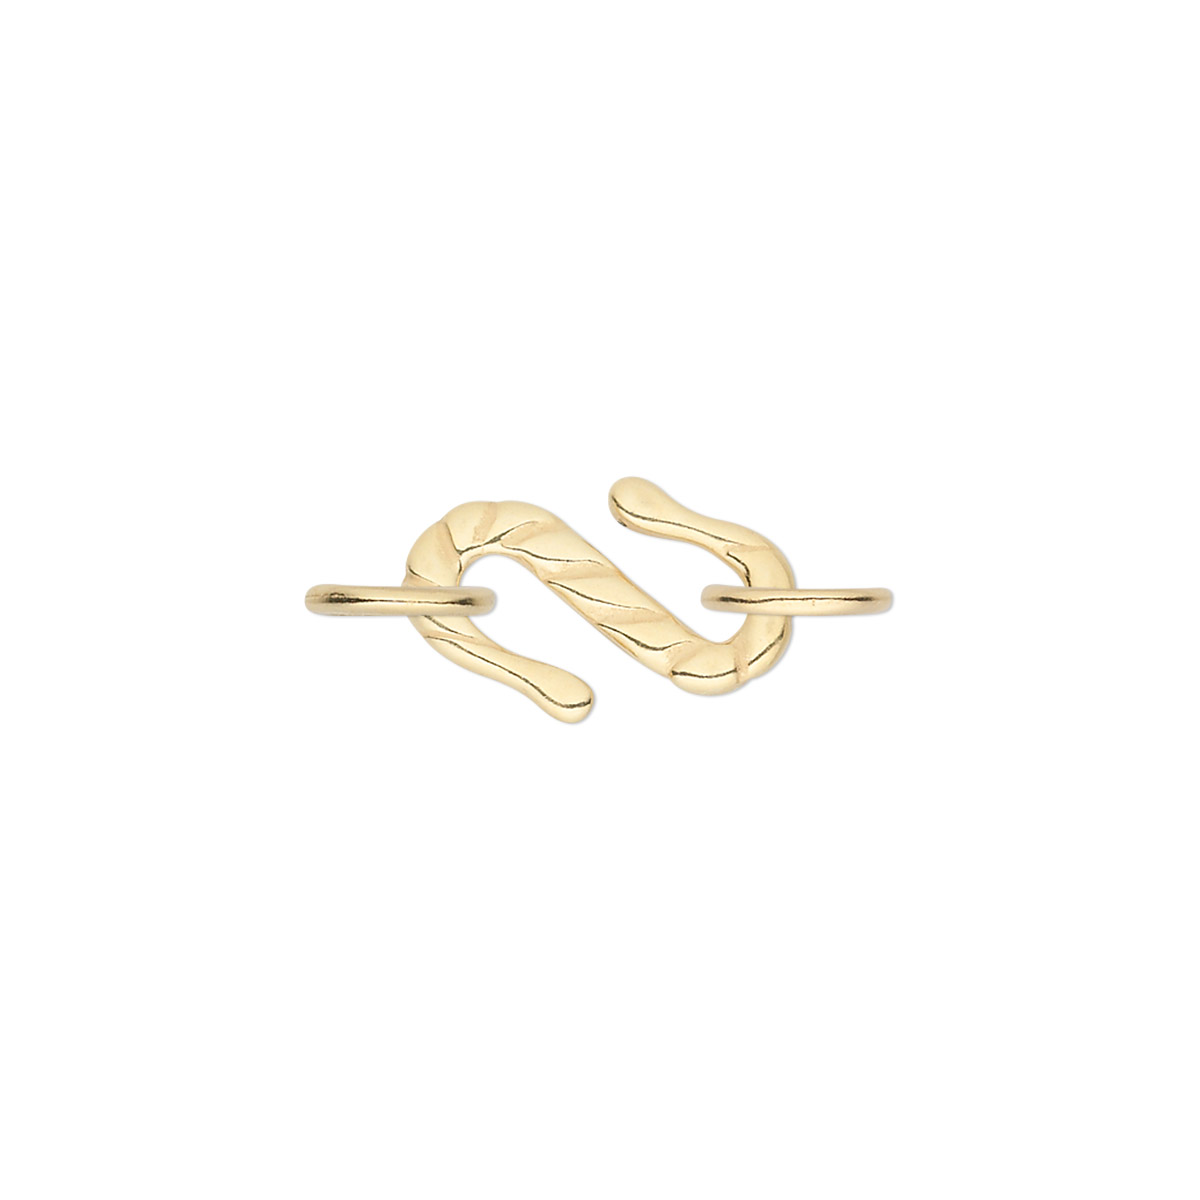 Clasp, JBB Findings, S-hook, gold-plated pewter (tin-based alloy